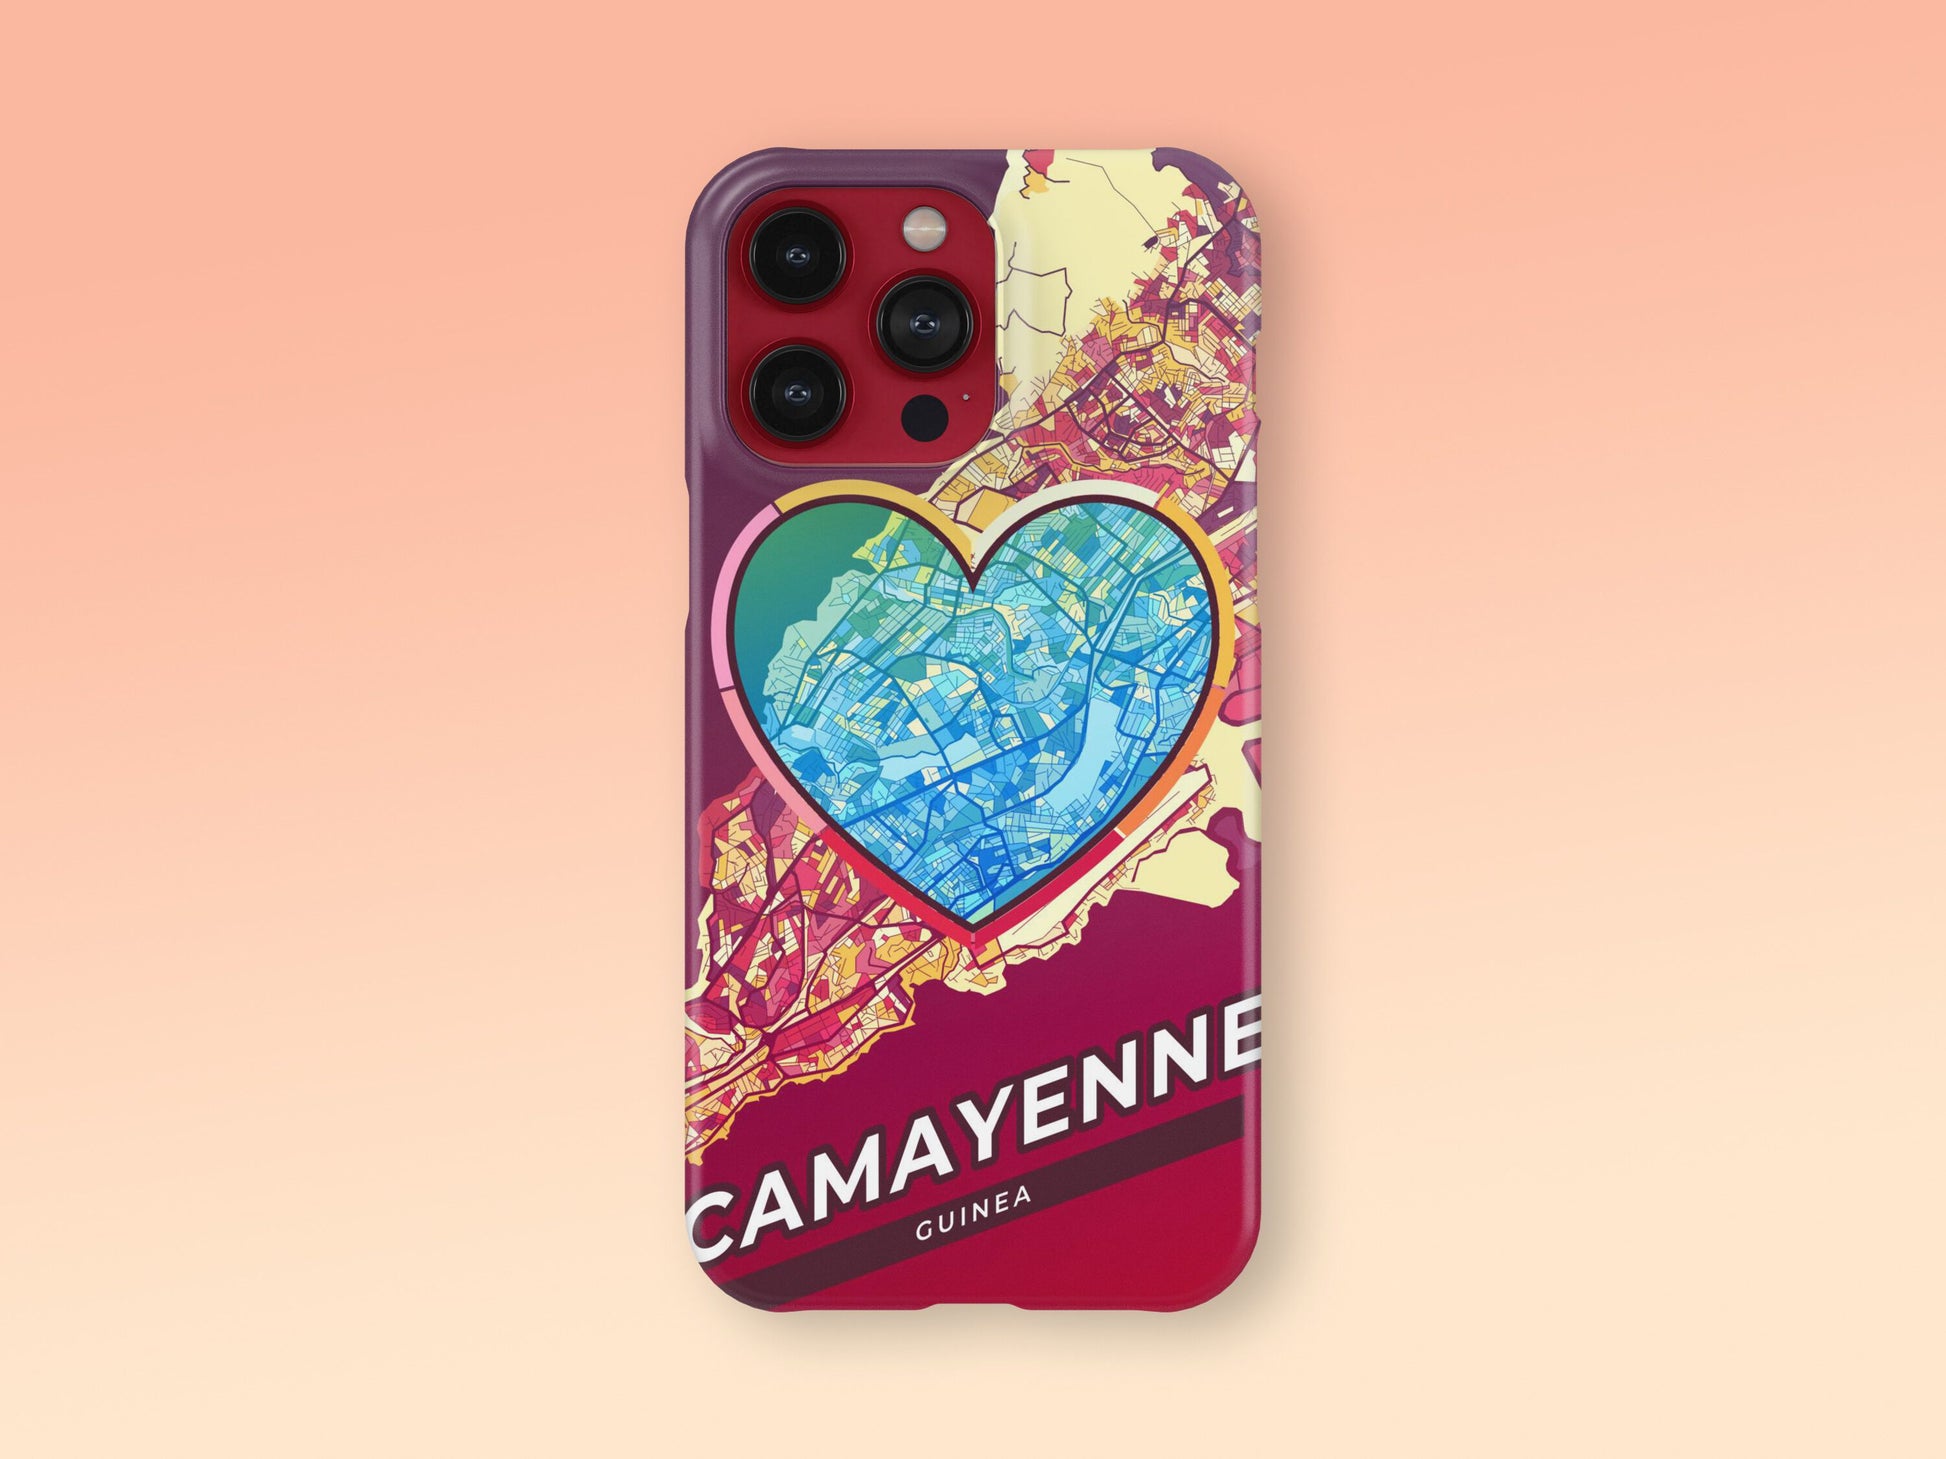 Camayenne Guinea slim phone case with colorful icon. Birthday, wedding or housewarming gift. Couple match cases. 2